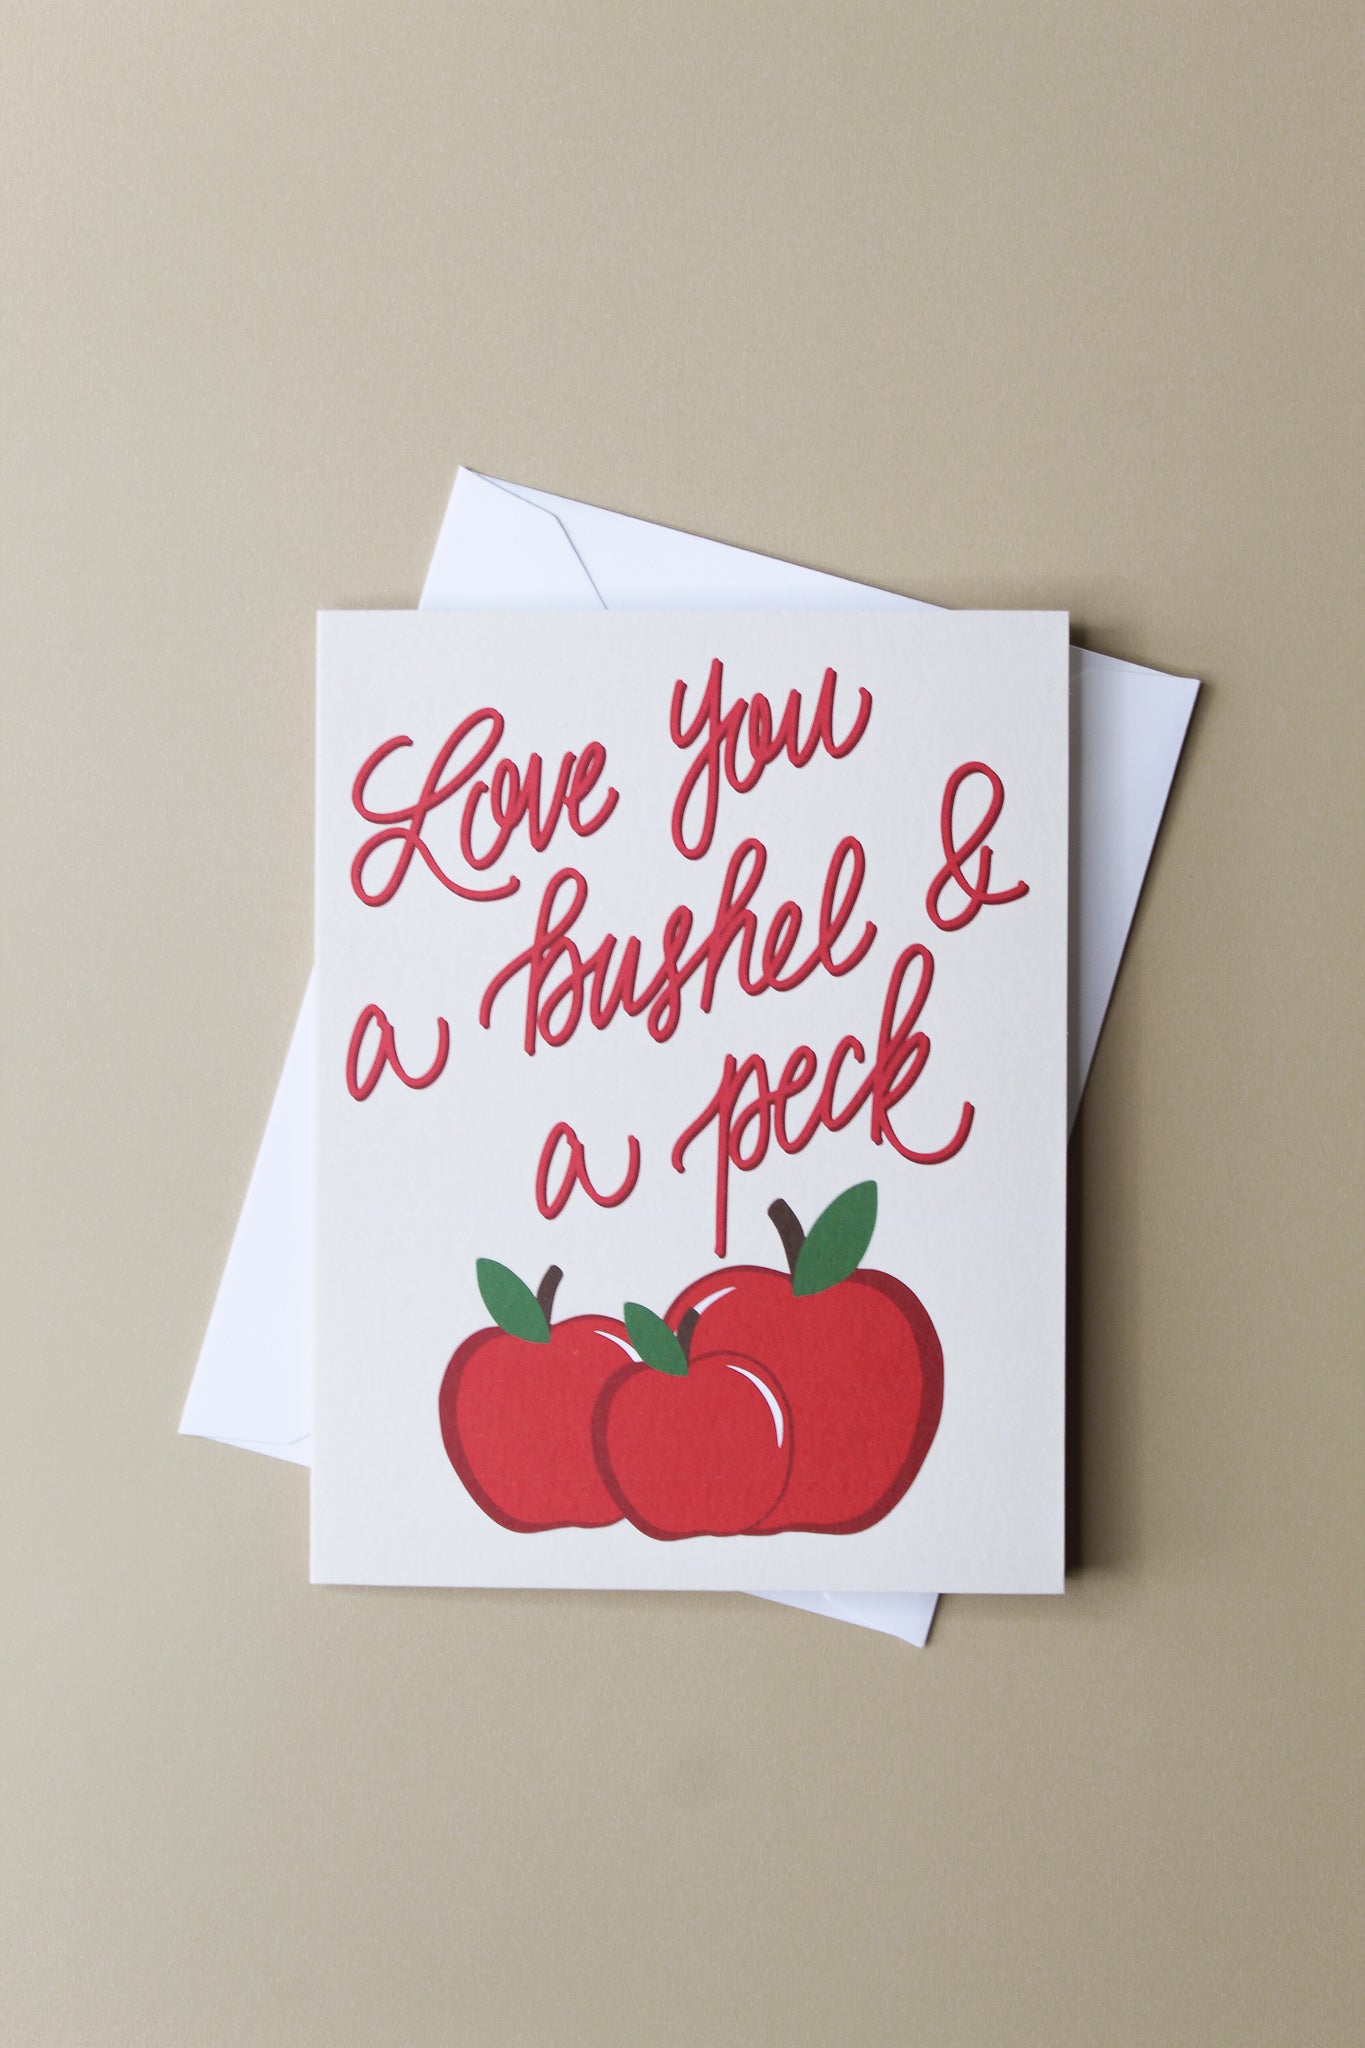 "Love You A Bushel and A Peck" greeting card is part of our cheerful fruit collection and so sweet for a little note of love or thanks to a special friend or child. Each card is folded to 4.25" tall by 5.5" wide, is blank inside and comes with a matching white envelope. Cards are packaged in cellophane sleeves. 